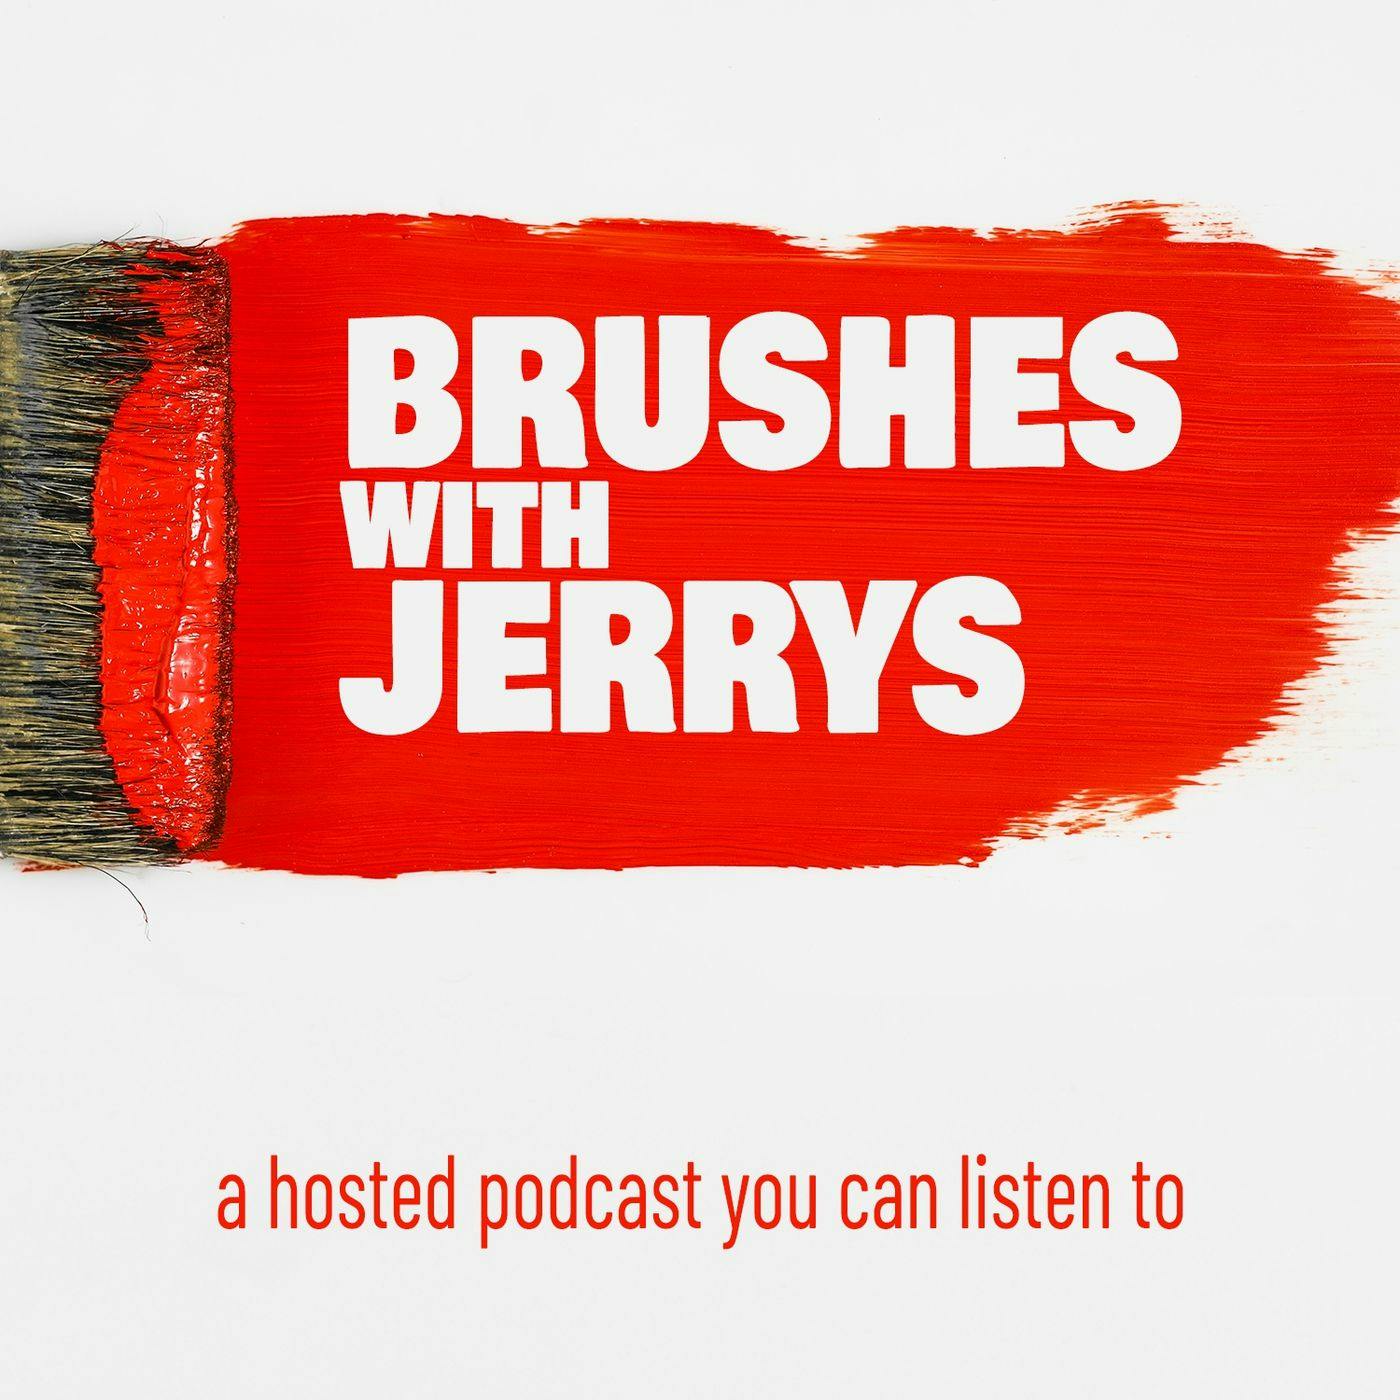 Introduction to Brushes with Jerrys